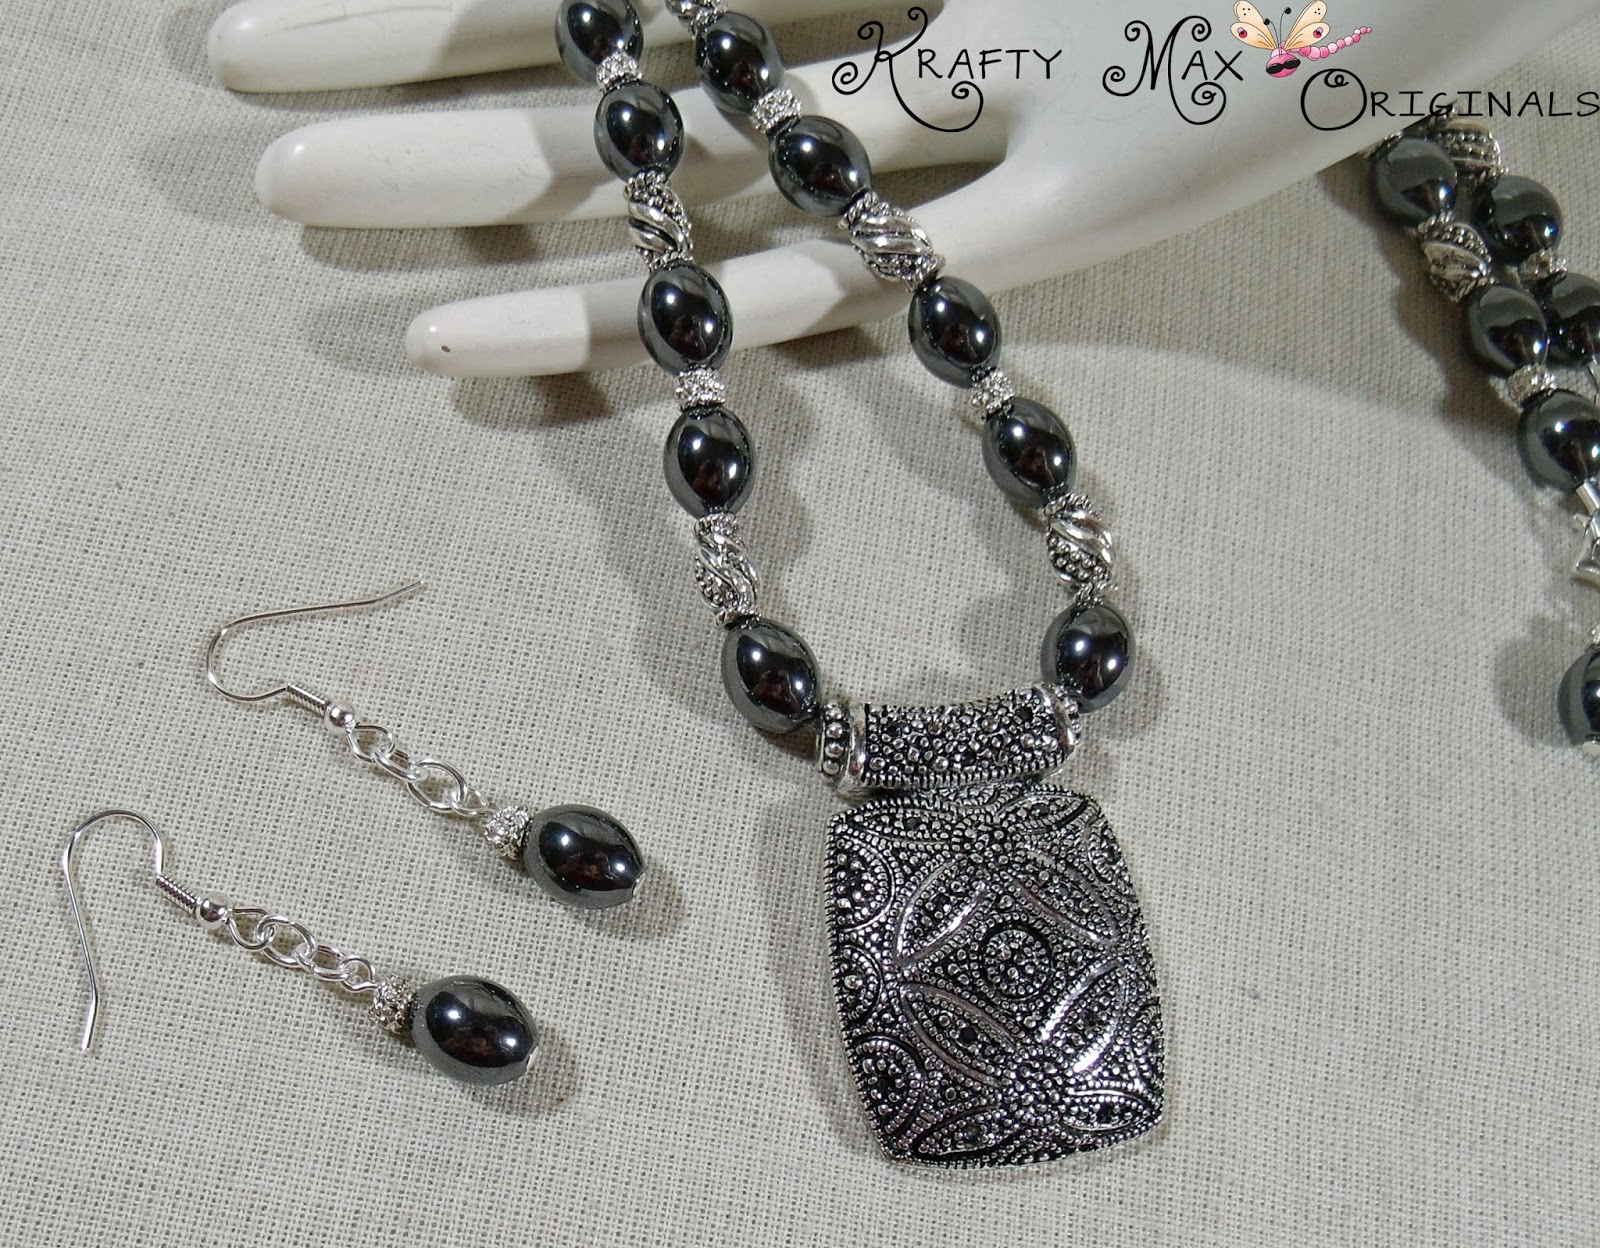 http://www.lajuliet.com/index.php/2013-01-04-15-21-51/ad/metal,94/exclusive-hematite-and-silver-beautiful-necklace-set-a-krafty-max-original-design,127